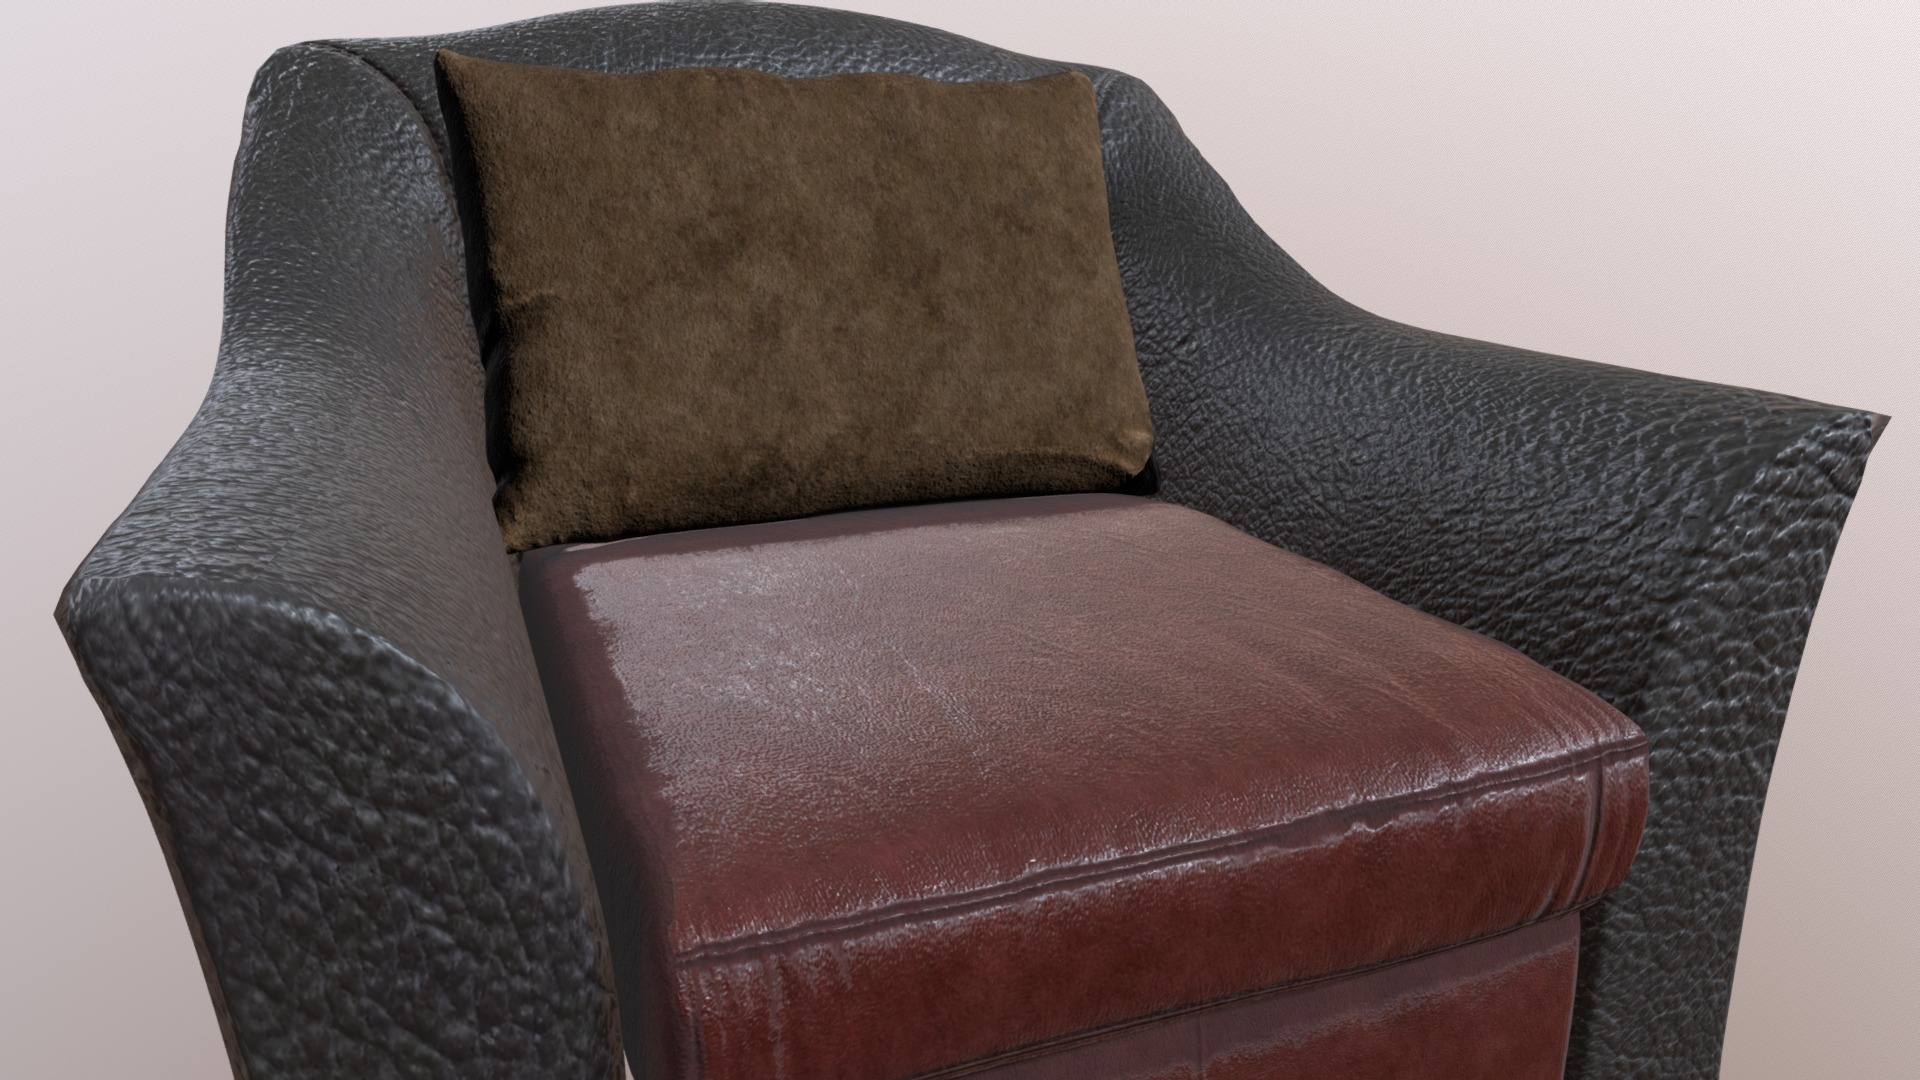 3D model ArmChair2 - This is a 3D model of the ArmChair2. The 3D model is about a brown leather chair.